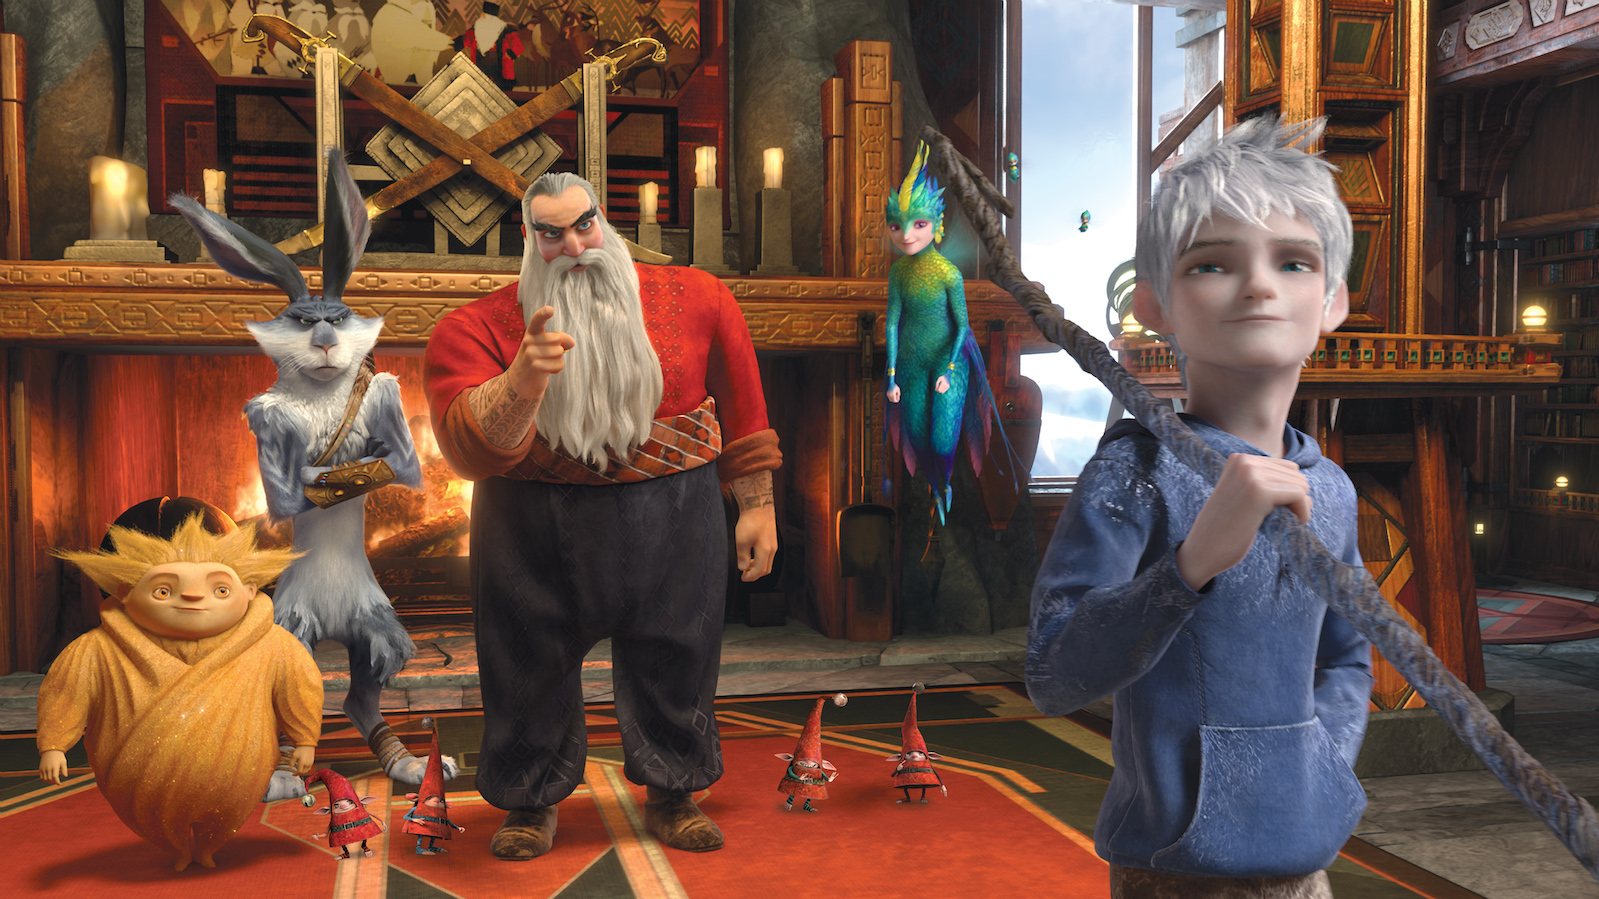 An animated image of fantastical creatures, including a man in a beard, a white-haired fairy, and a tall bunny rabbit looking at a boy holding a stick